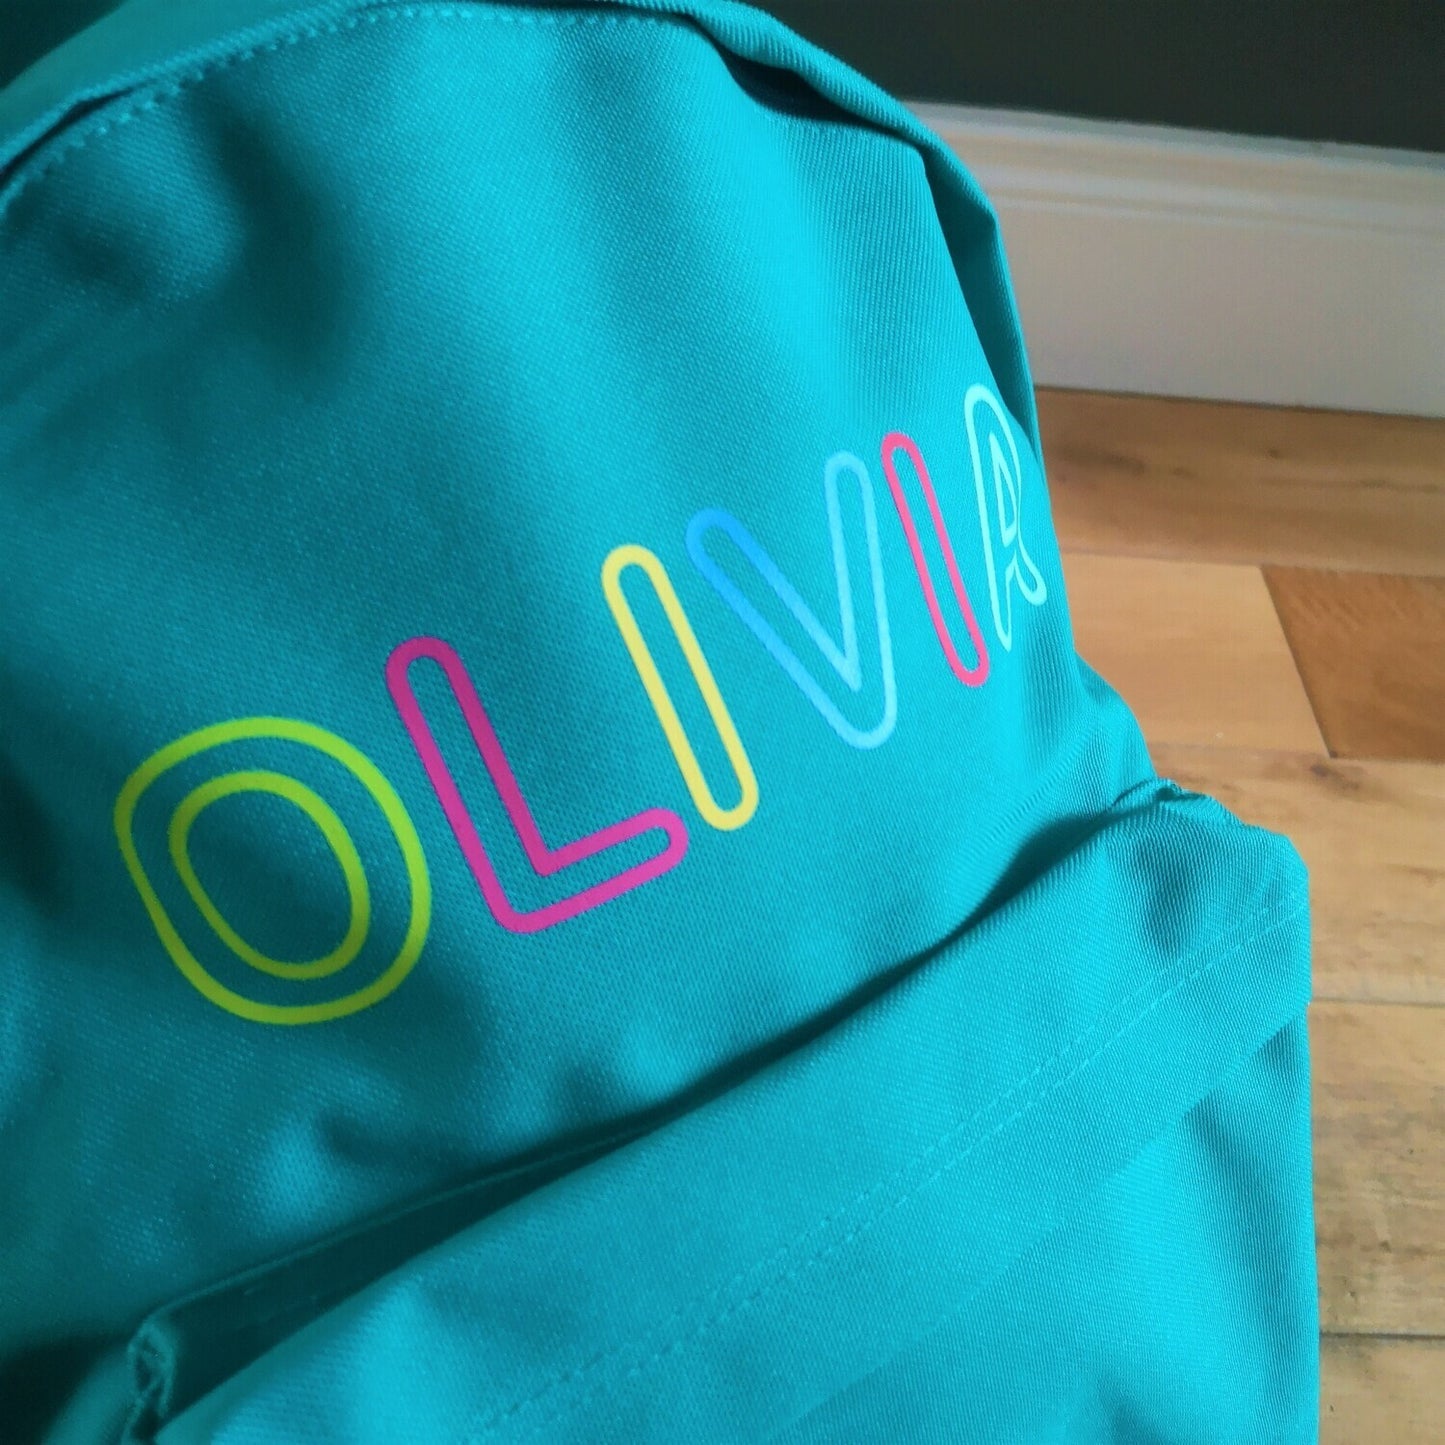 A close up of an emerald green kids backpack with their name written along the top in different coloured letters